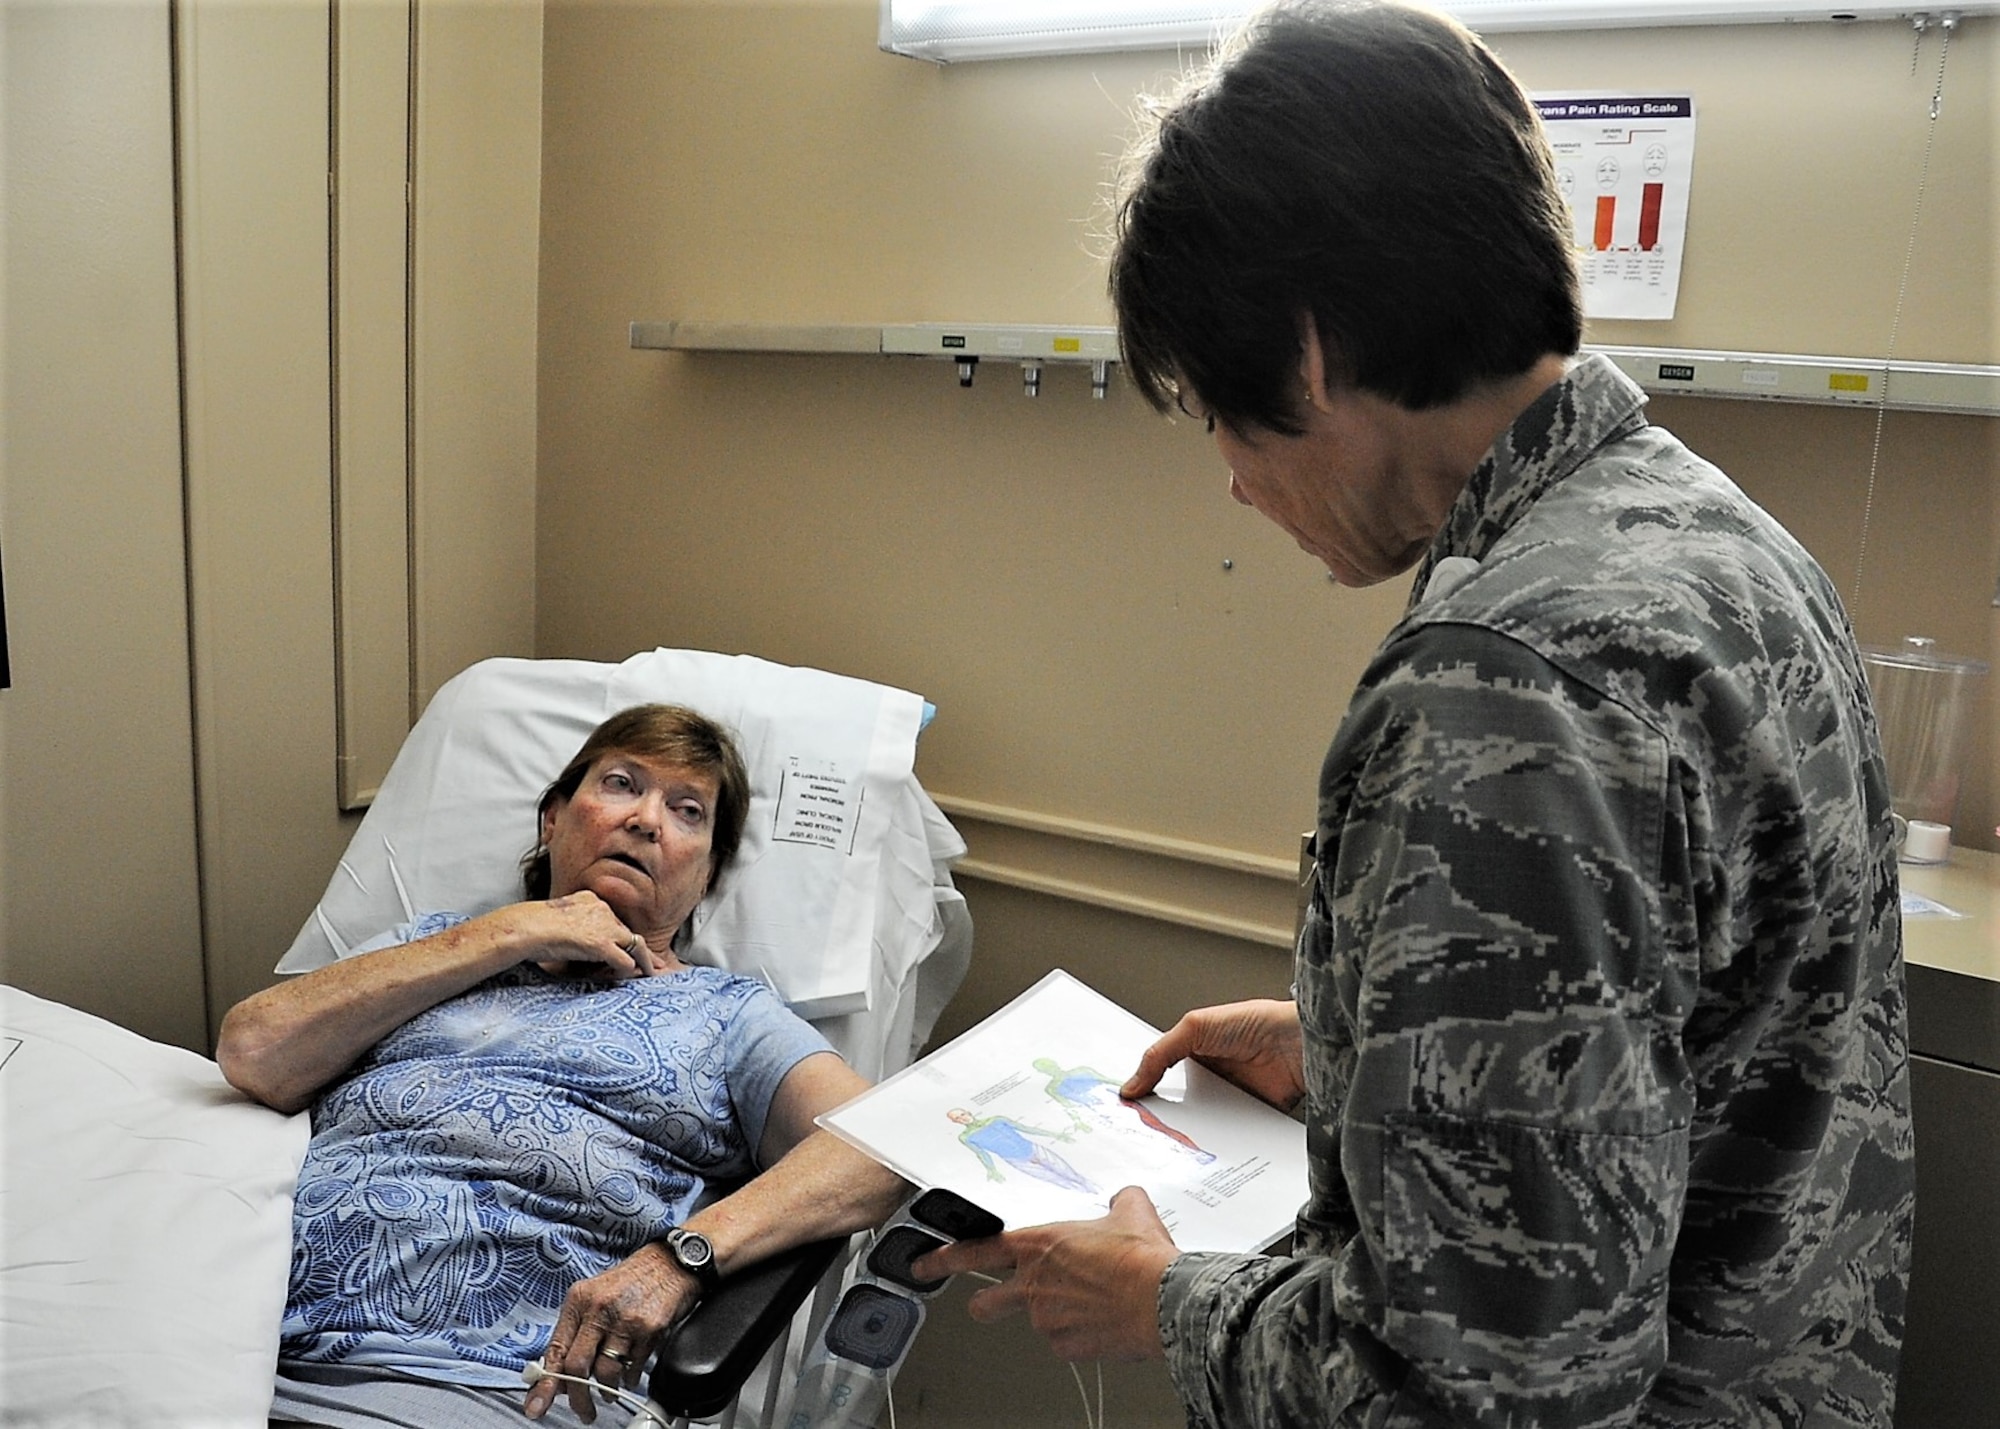 Lt. Col Candy Wilson, right, 779th Medical Group nurse practitioner, consults a human anatomy chart to determine where to place a Calmare electrode for treating Carol Celeste Gray, a patient at Joint Base Andrews, Md., May 30, 2017. Gray suffers from chronic regional pain syndrome on the left side of her body that developed after being treated for a broken elbow.
 (U.S. Air Force photo by Staff Sgt. Joe Yanik)